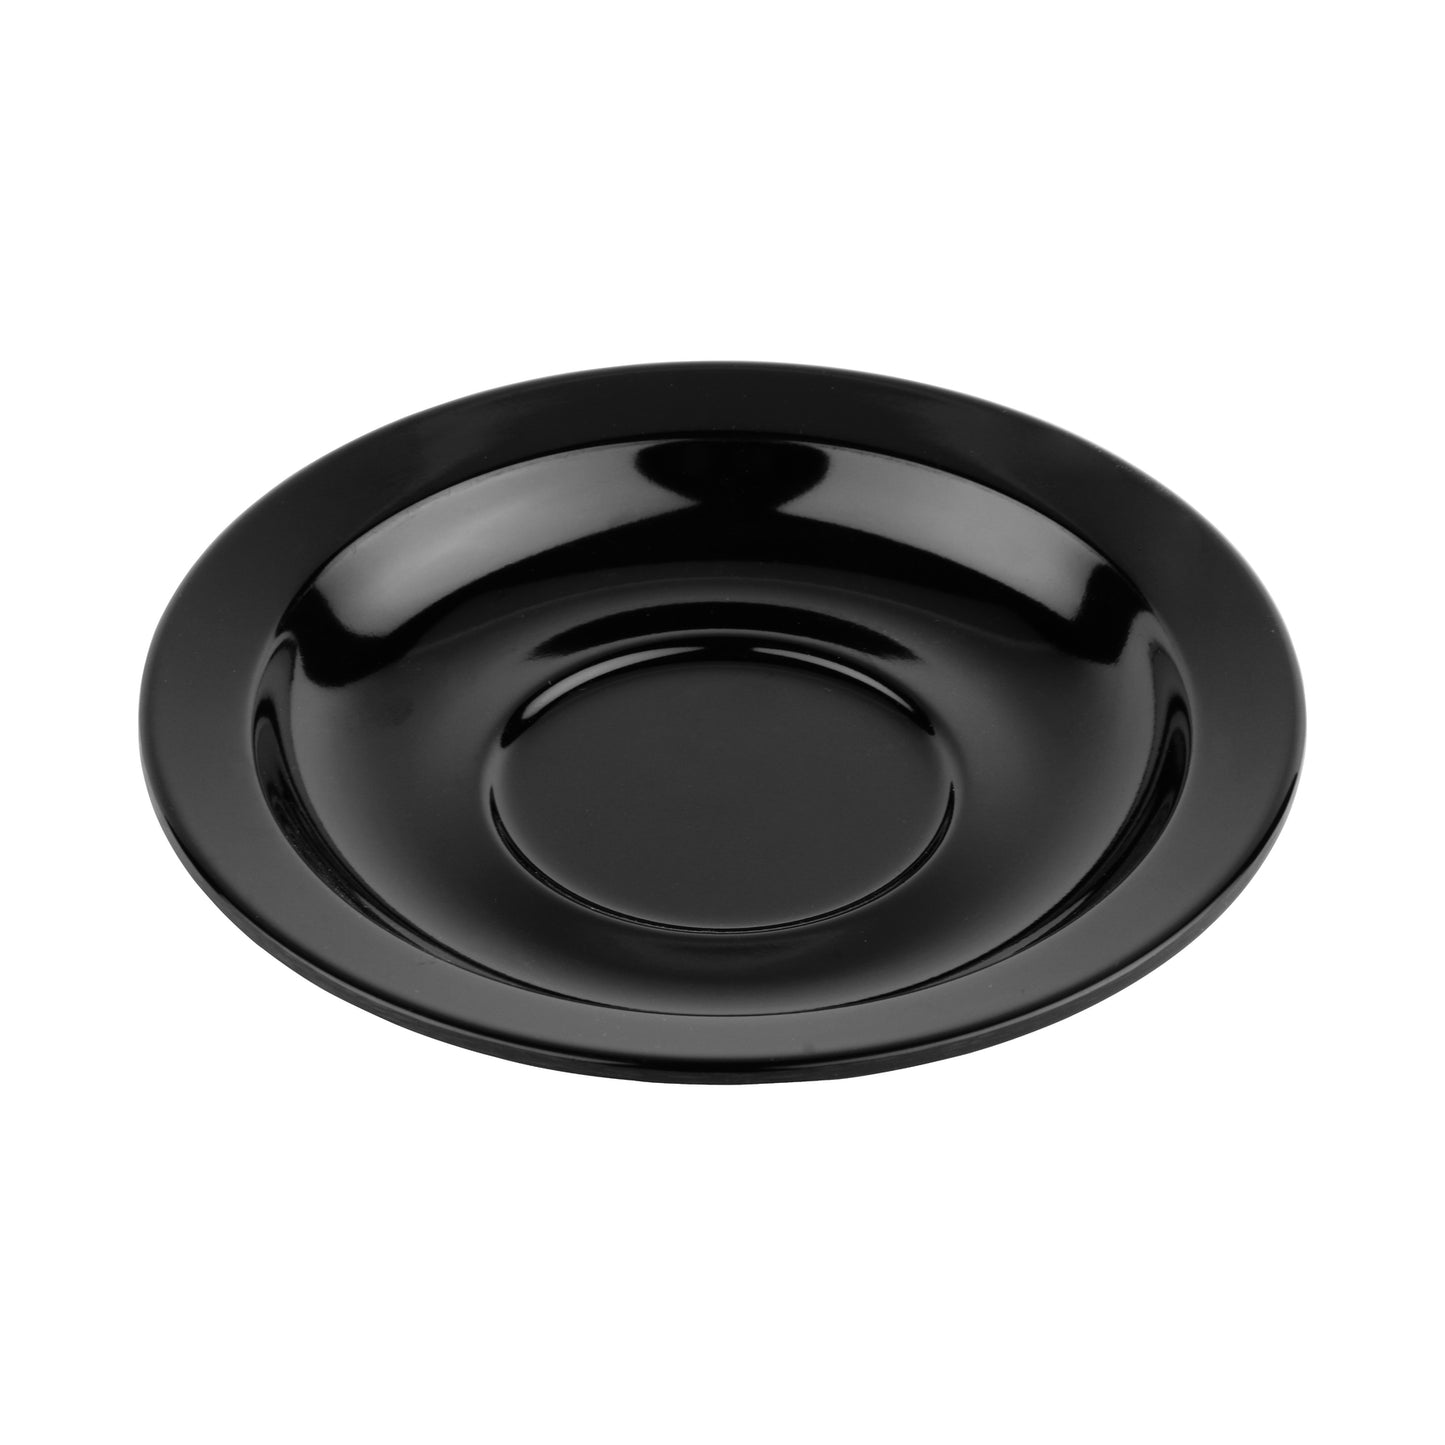 4.5" Saucer for Espresso Cup C-1004 (12 Pack)